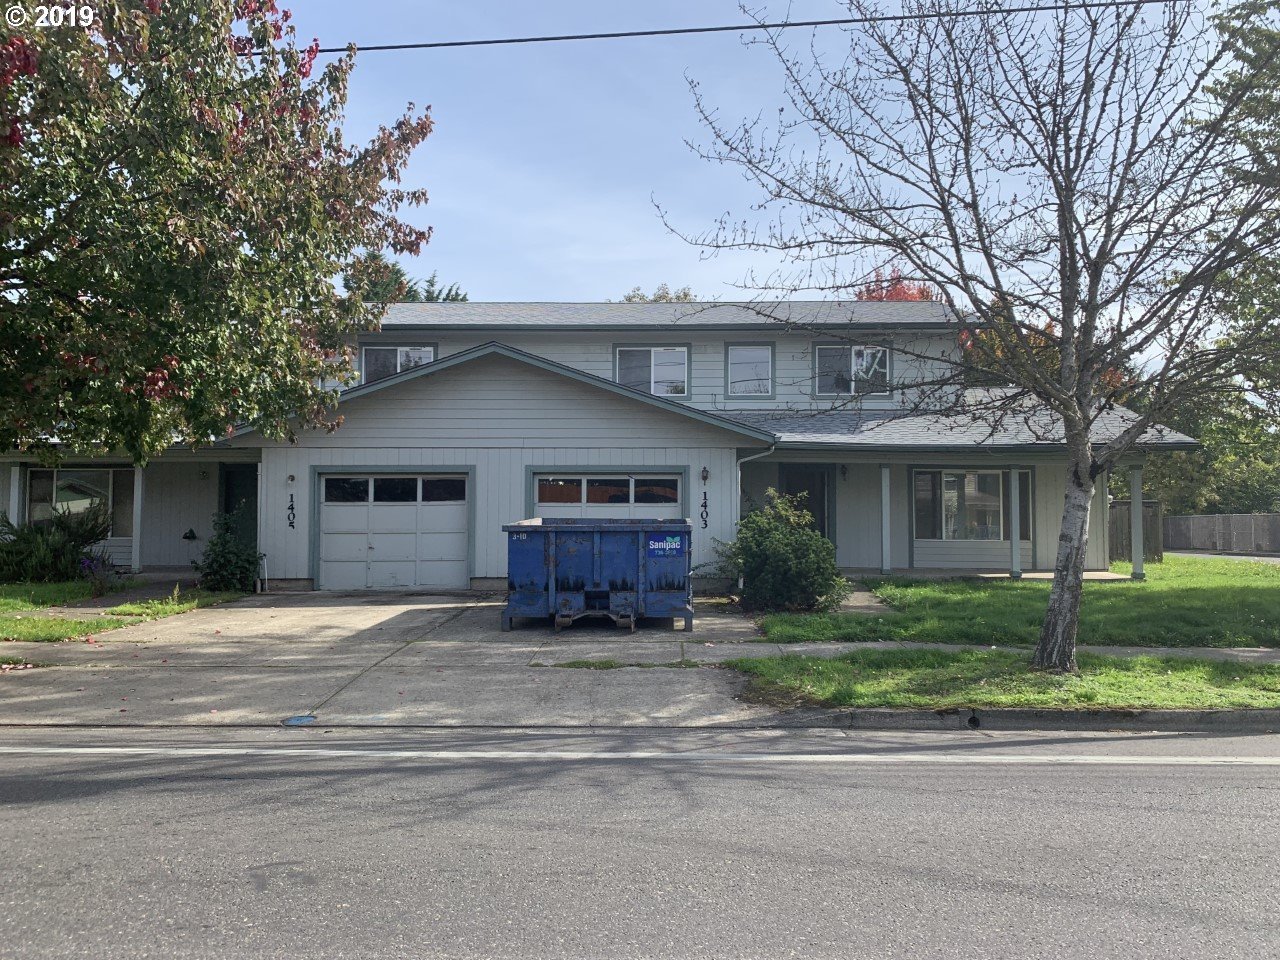 1403/1405 5th St, Springfield, OR 97477 | MLS# 19000836 | Redfin